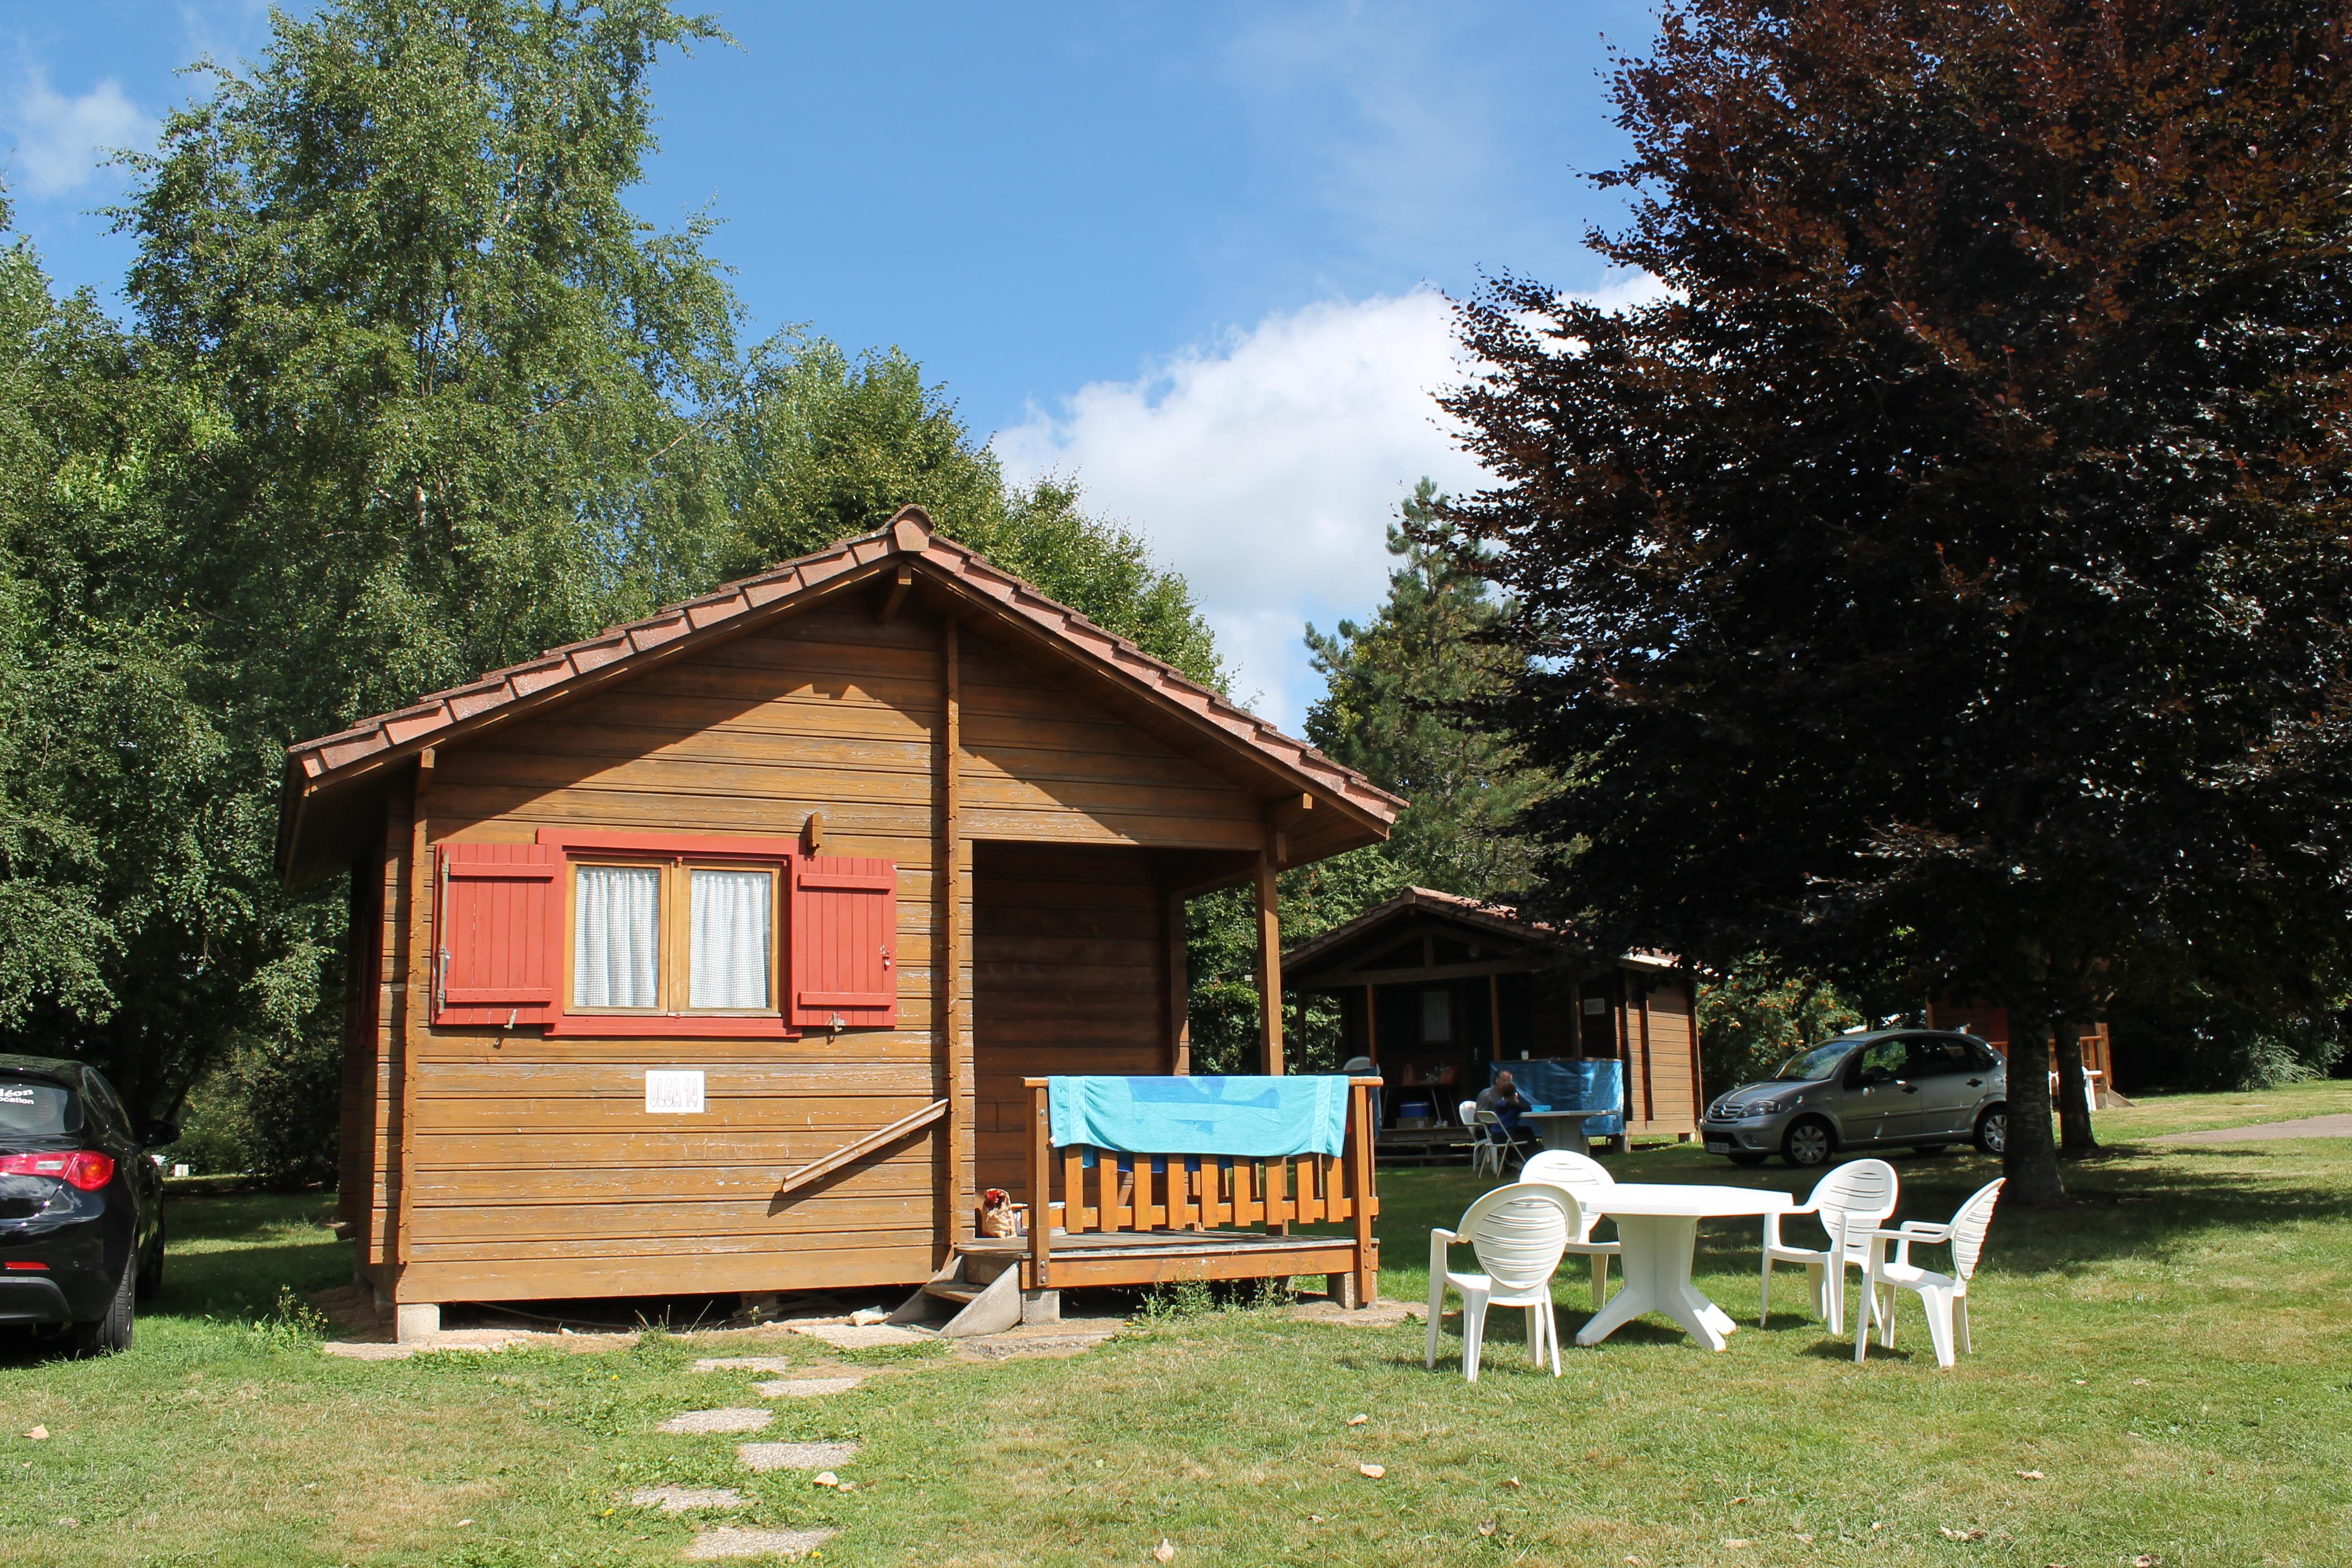 Accommodation - Mini-Chalet Without Toilet Blocks Anaïs - Camping du Lac